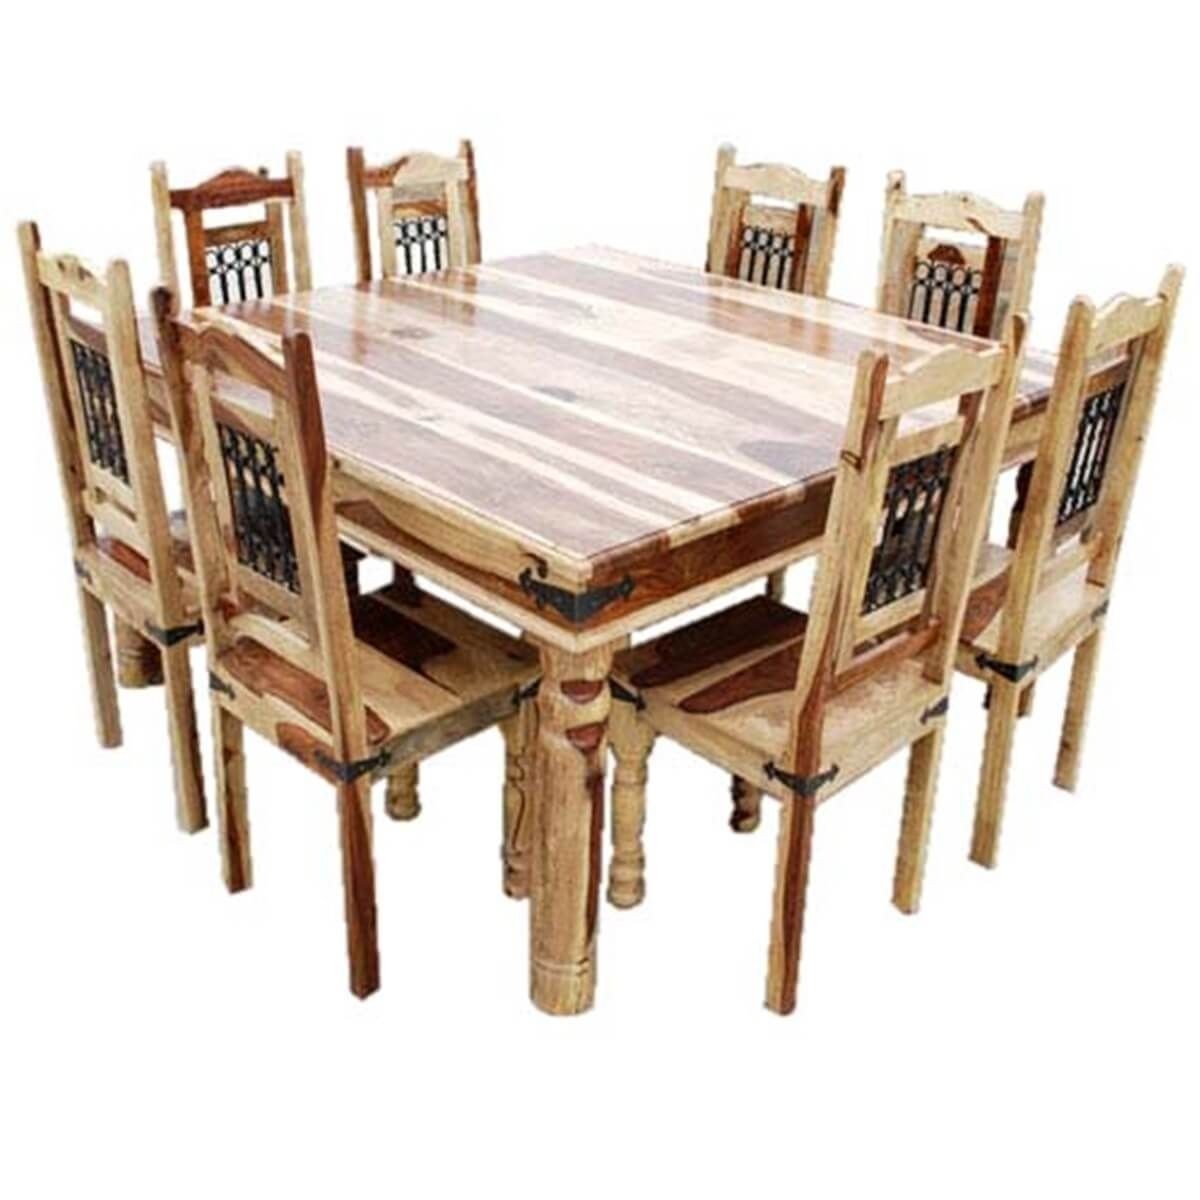 Rustic Square Dining Table And Chair Set Seat 8 Person Solid Wood Furniture